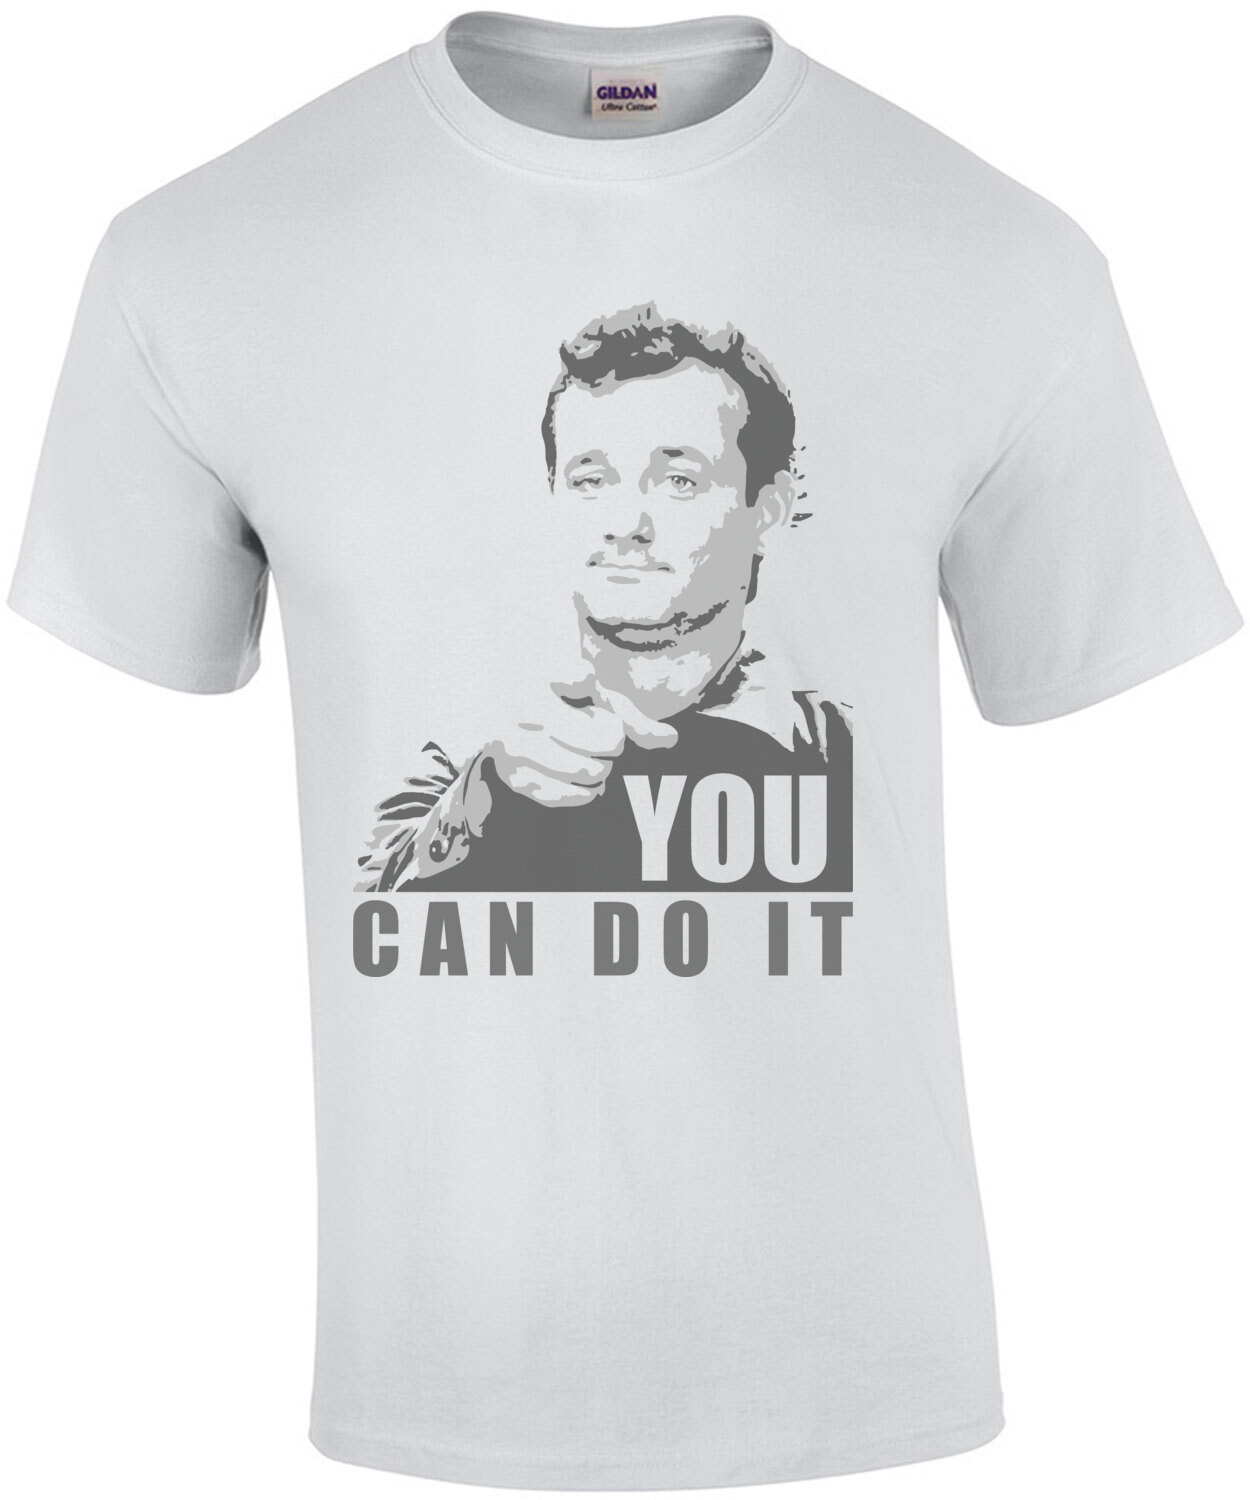 You can do it - Bill Murray - Stripes - 80's T-Shirt